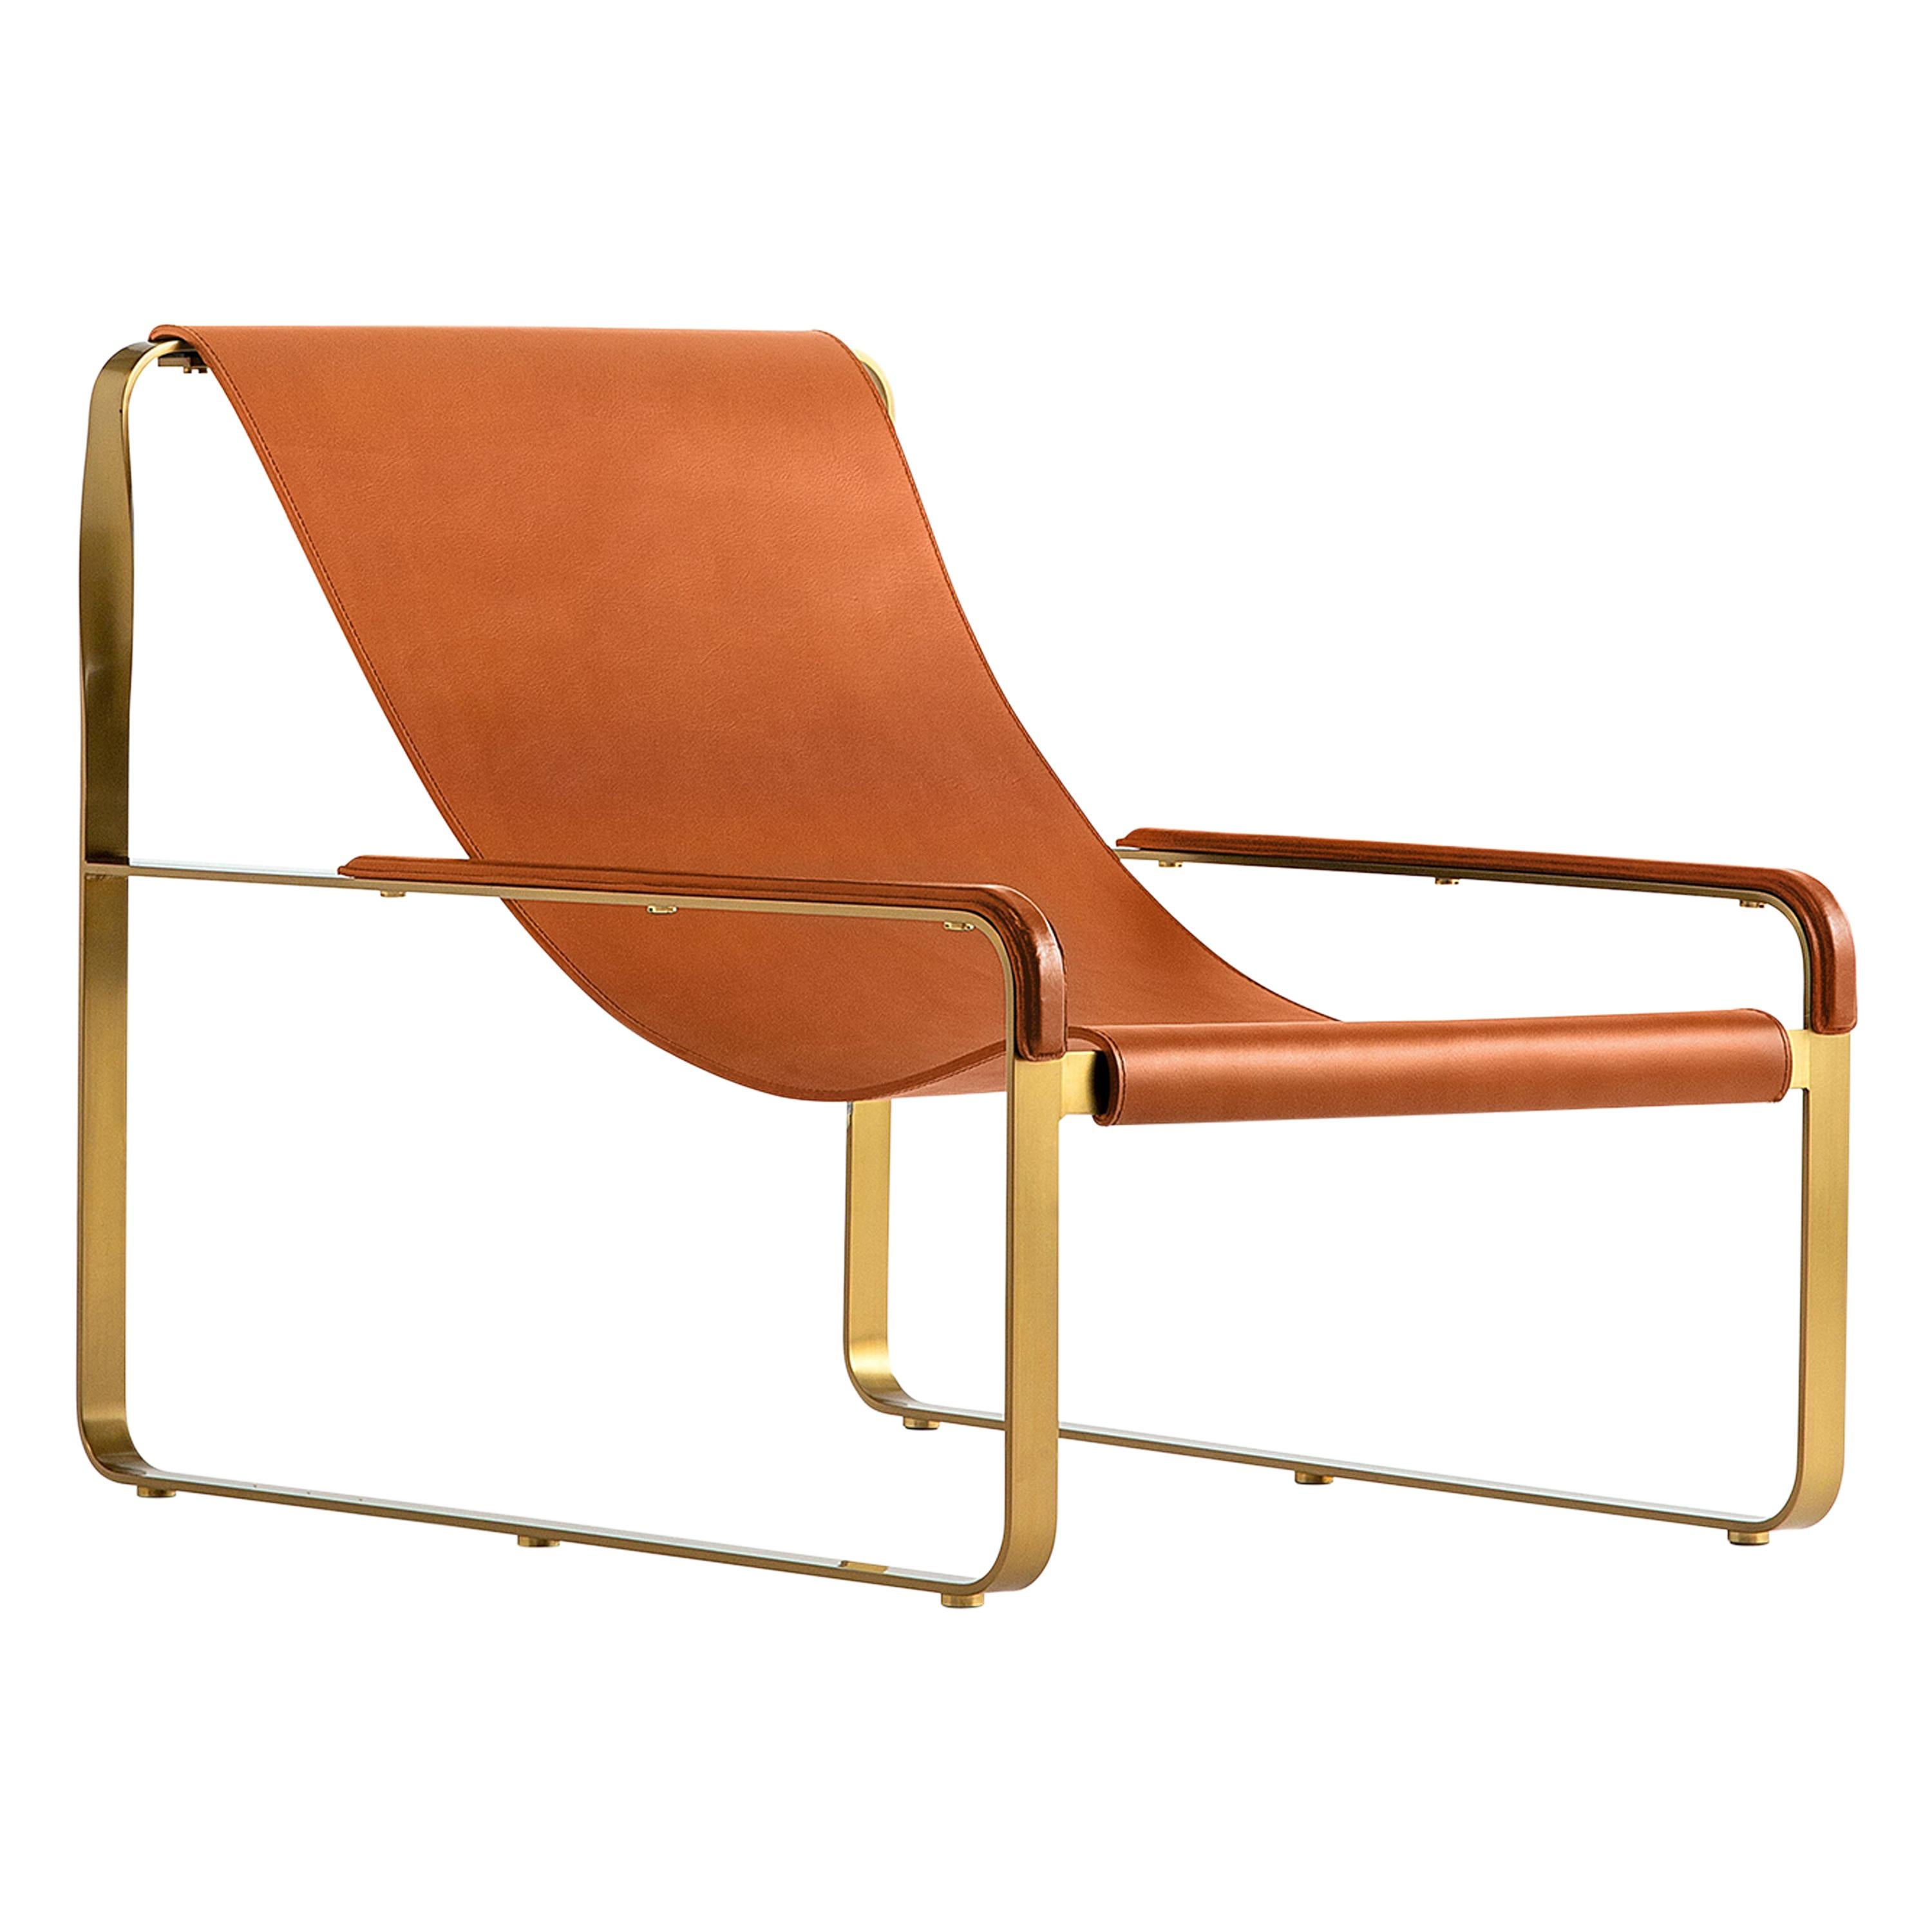 Timeless Contemporary Chaise Lounge Aged Brass Steel & Natural Tobacco Leather For Sale